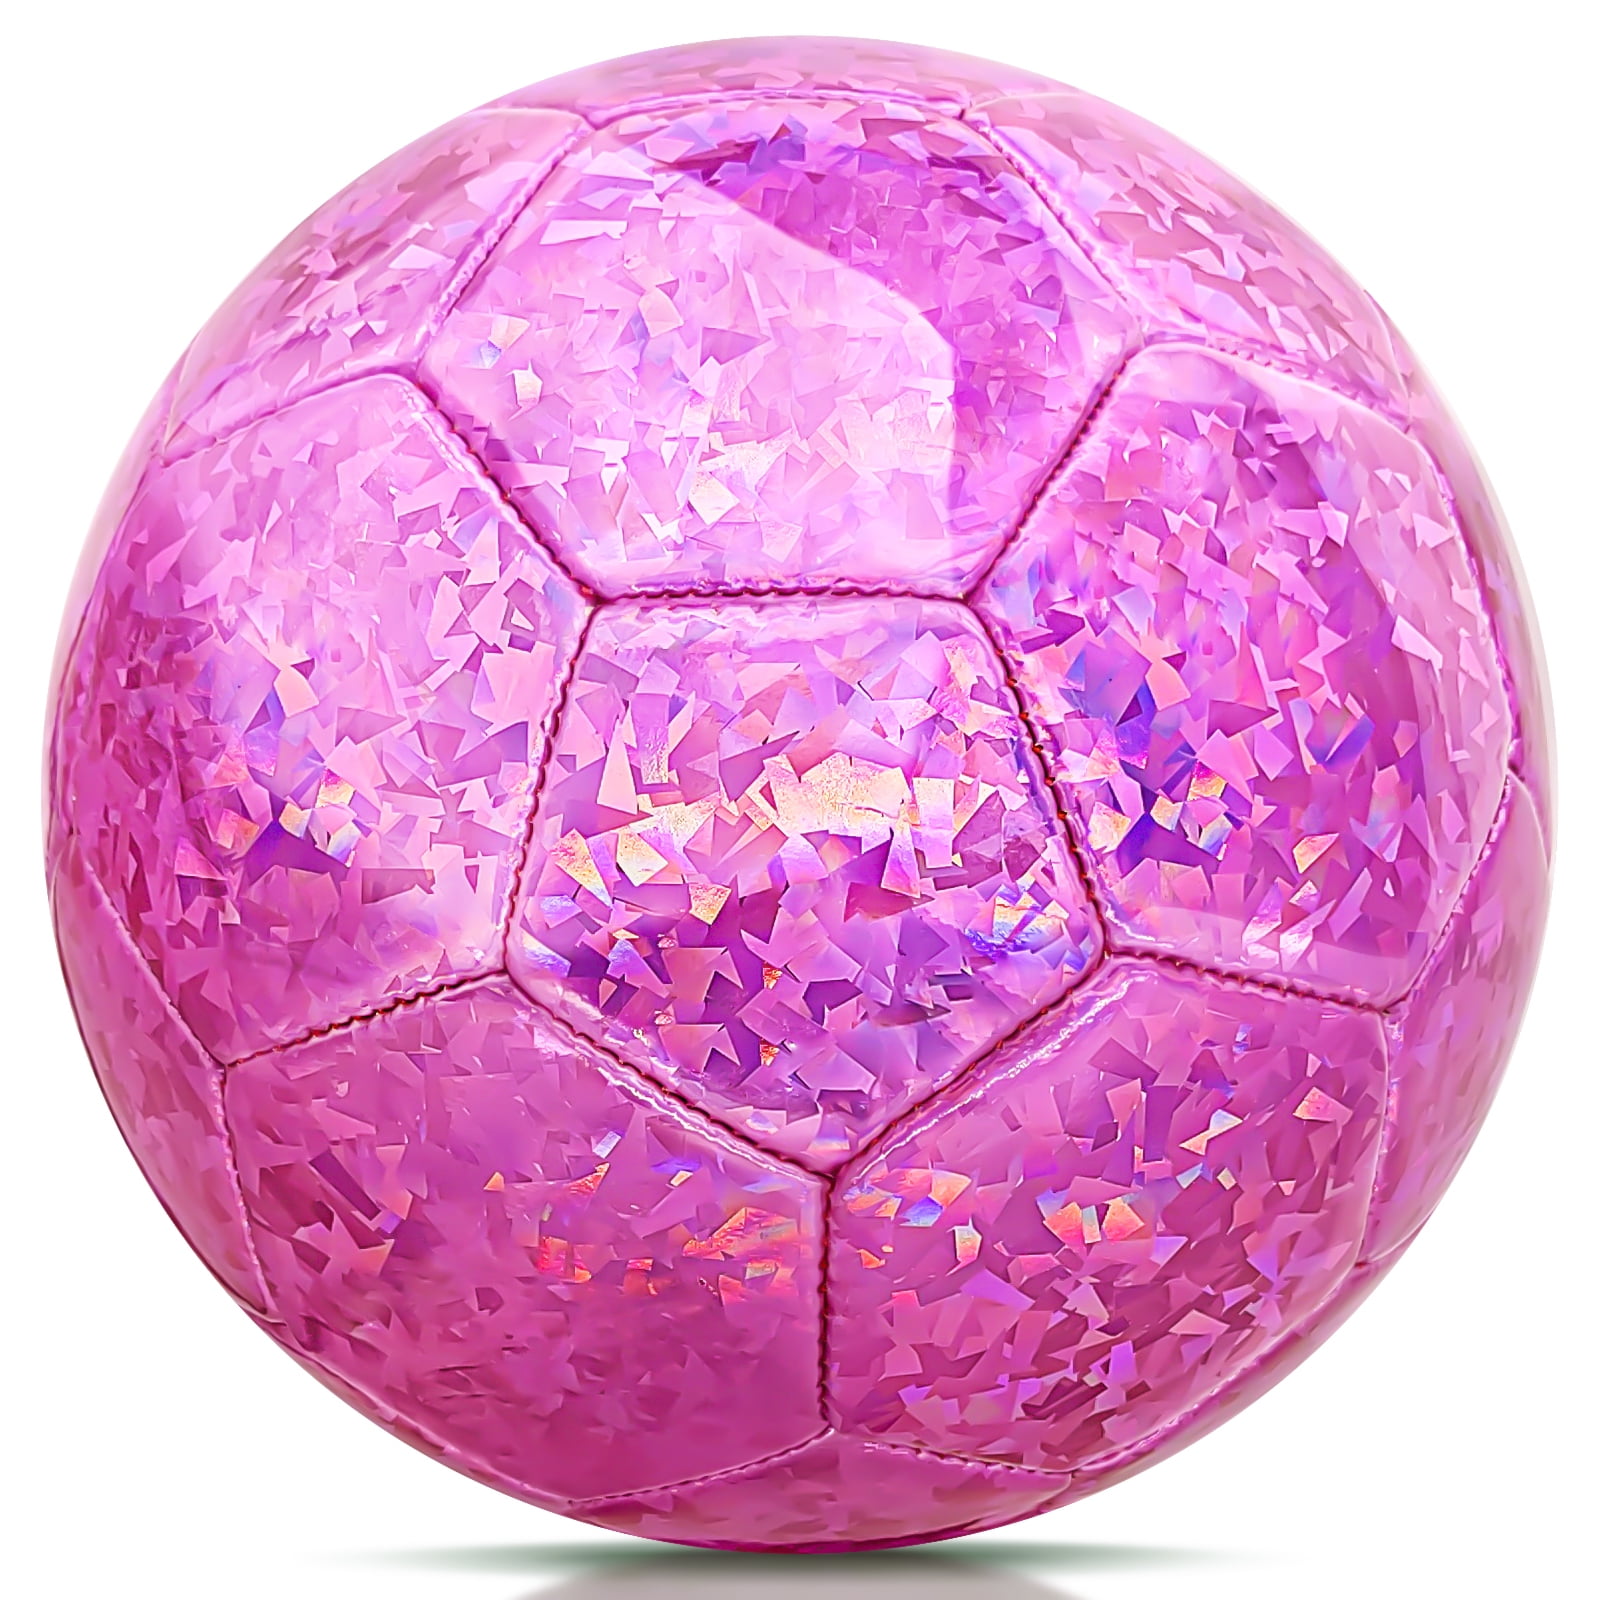 Champhox Soccer Ball Kid Ages 3 4-6 6-8 8-12 Outdoors Indoor Sports Recreation Soccer Ball for Toddlers Girls Boys Child Christmas Birthday Gifts